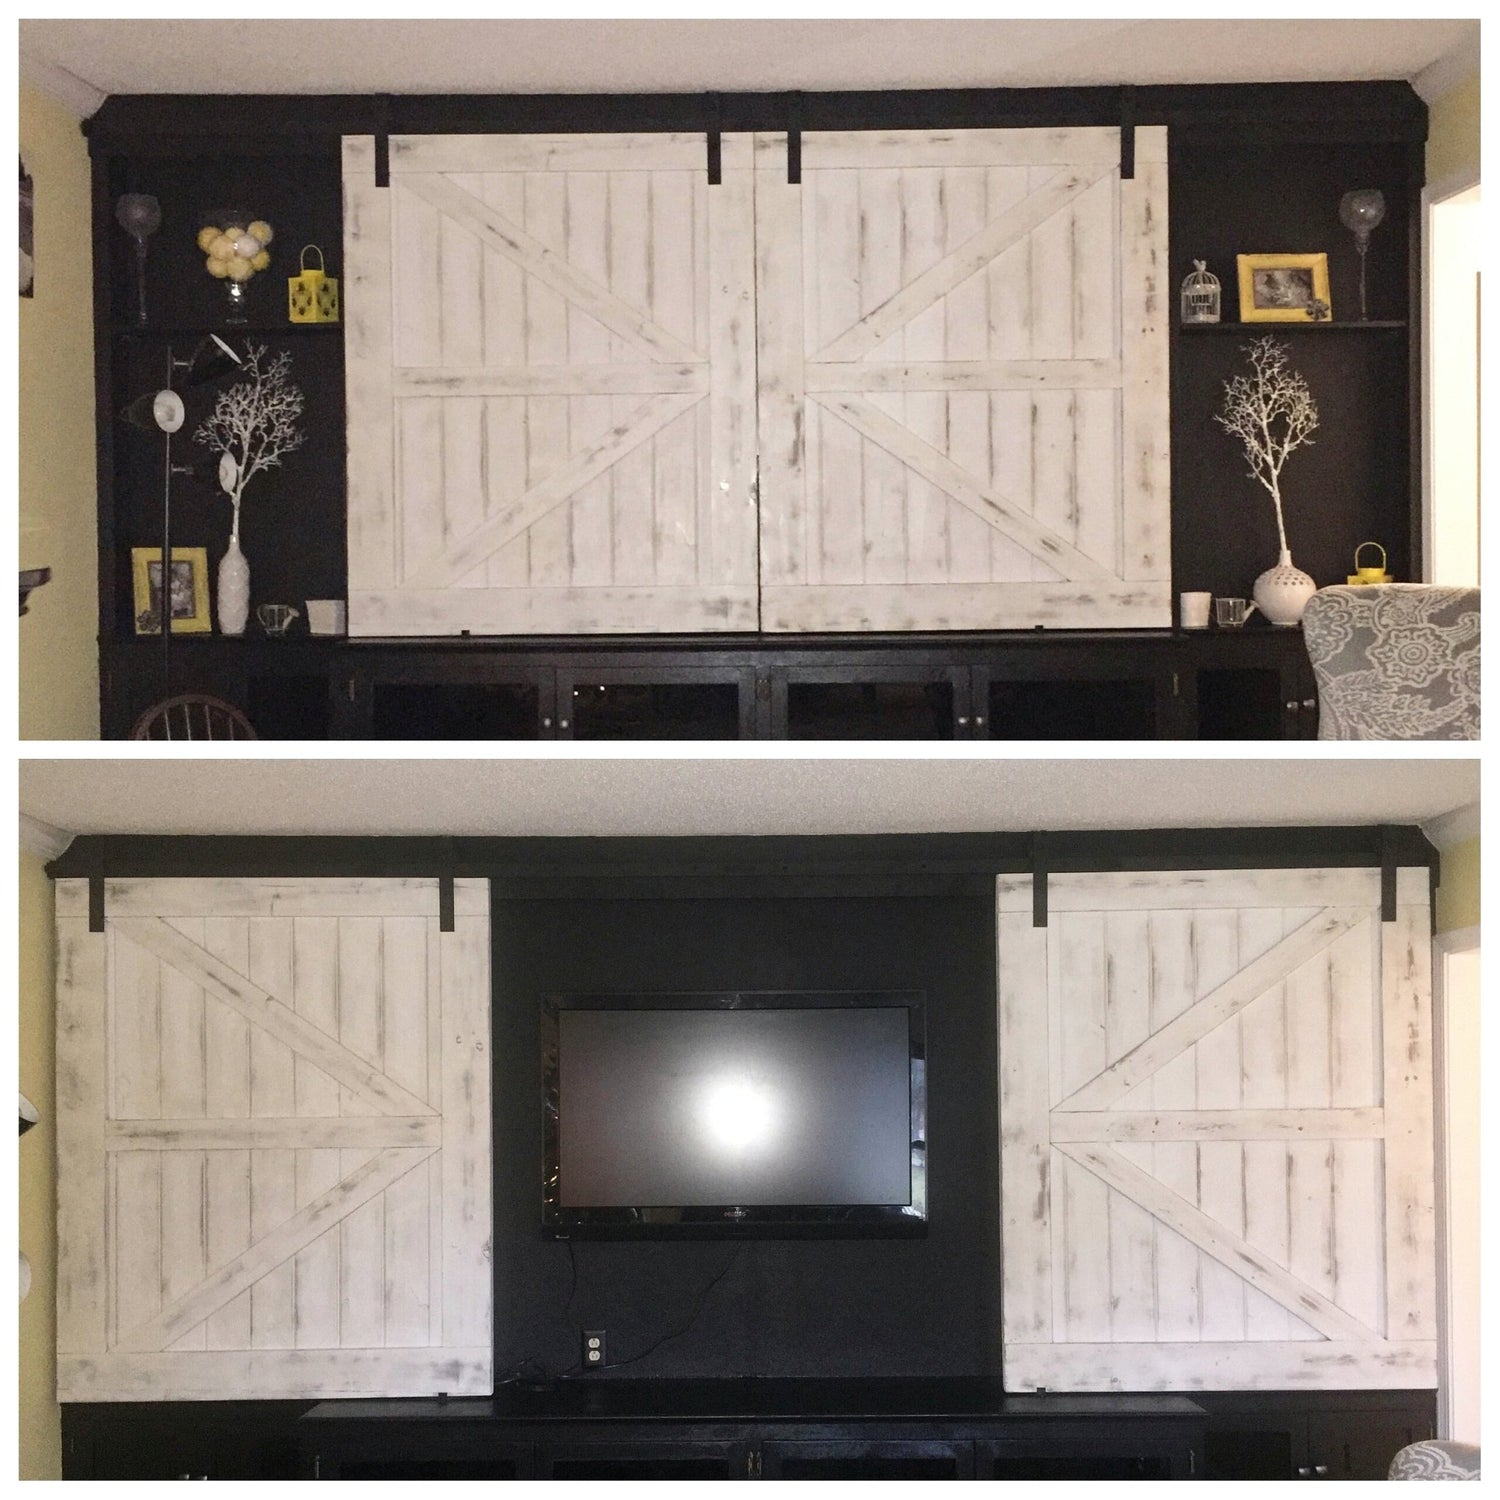 Images of a TV mounted on a wall with barn door style cover